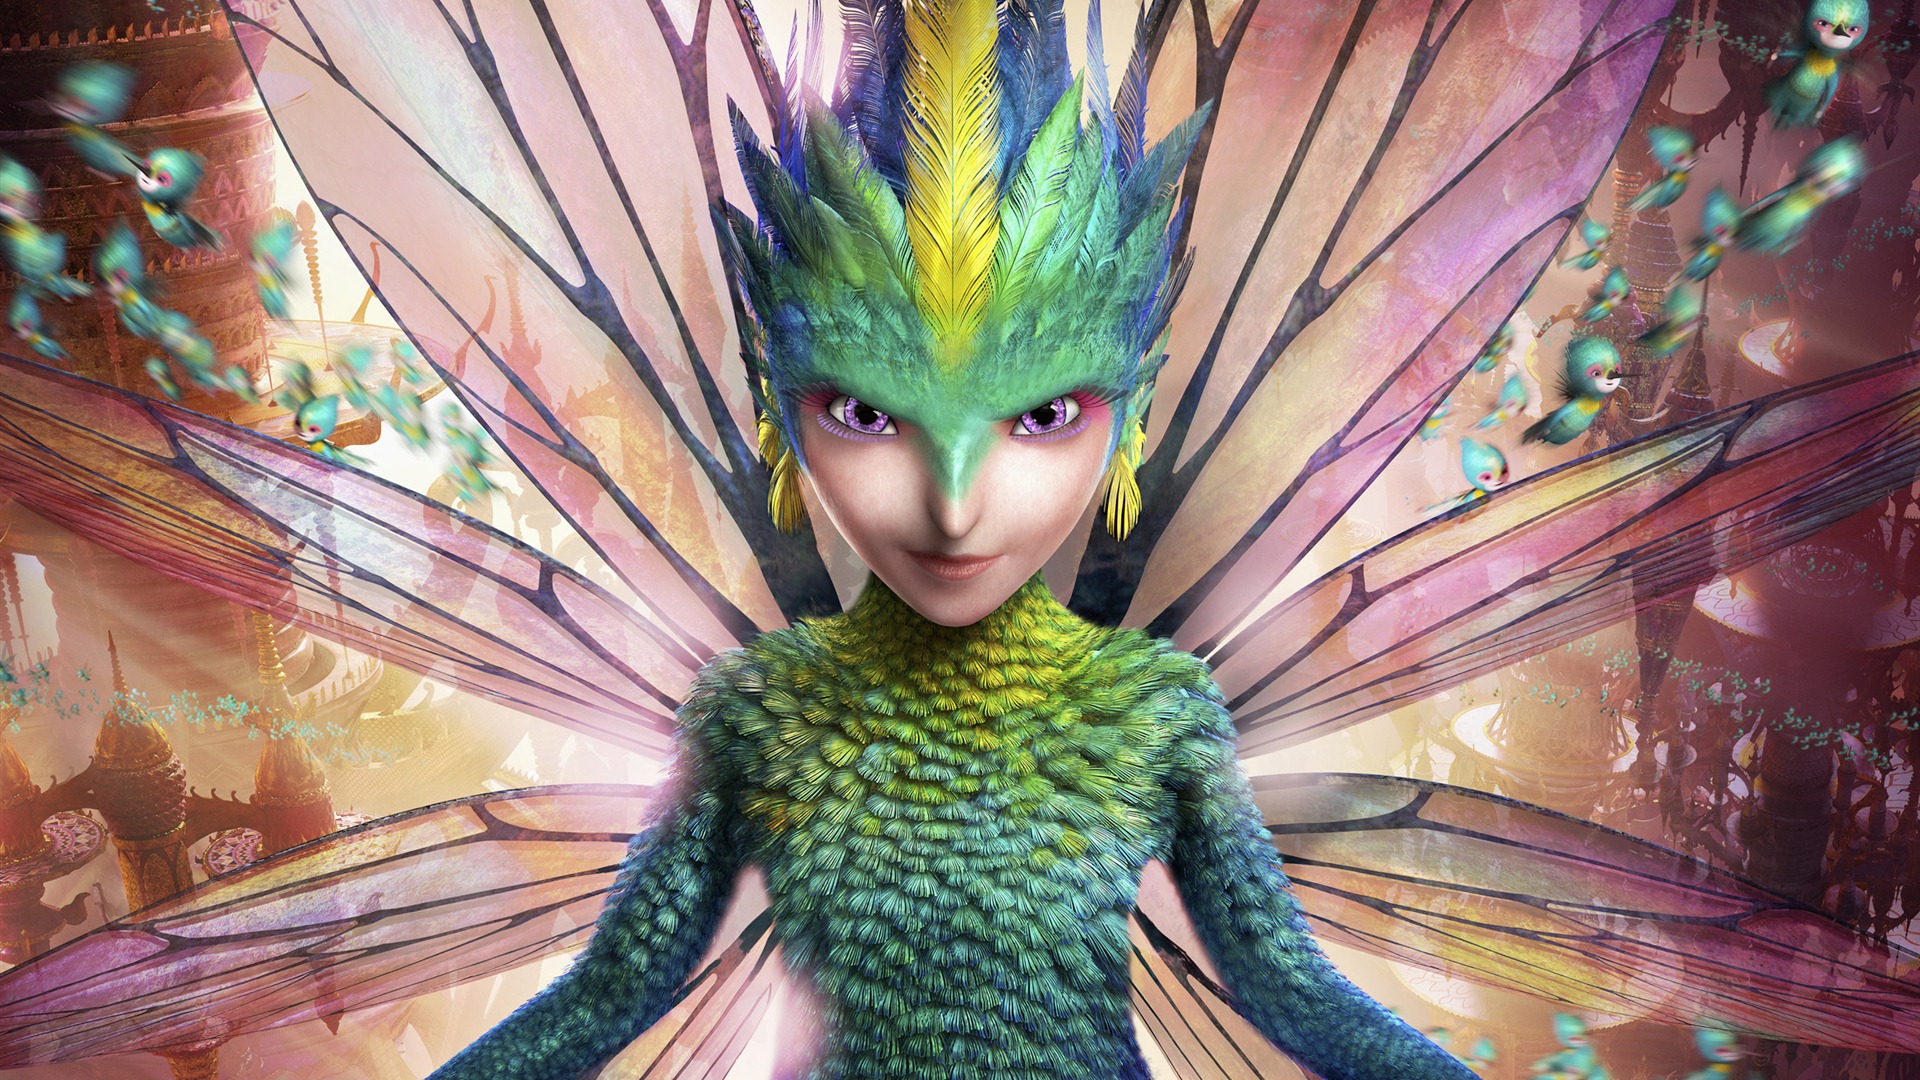 Rise of the Guardians 守護者聯盟 高清壁紙 #14 - 1920x1080